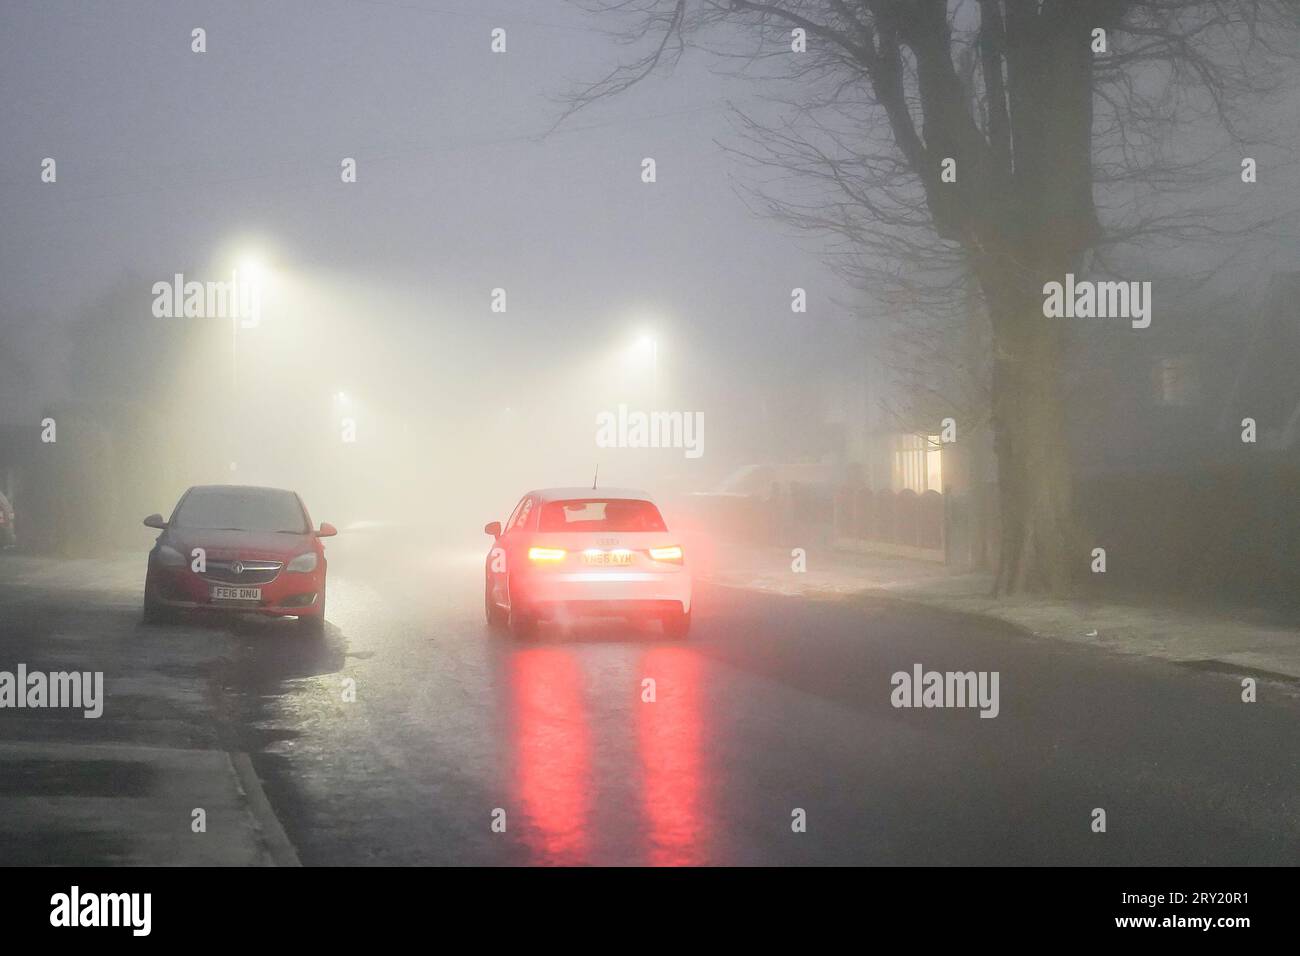 Kidderminster, UK. 7th January, 2021. UK weather: heavy fog and freezing temperatures makes travel very unnerving for motorists with treacherous road conditions. Credit: Lee Hudson/Alamy Stock Photo